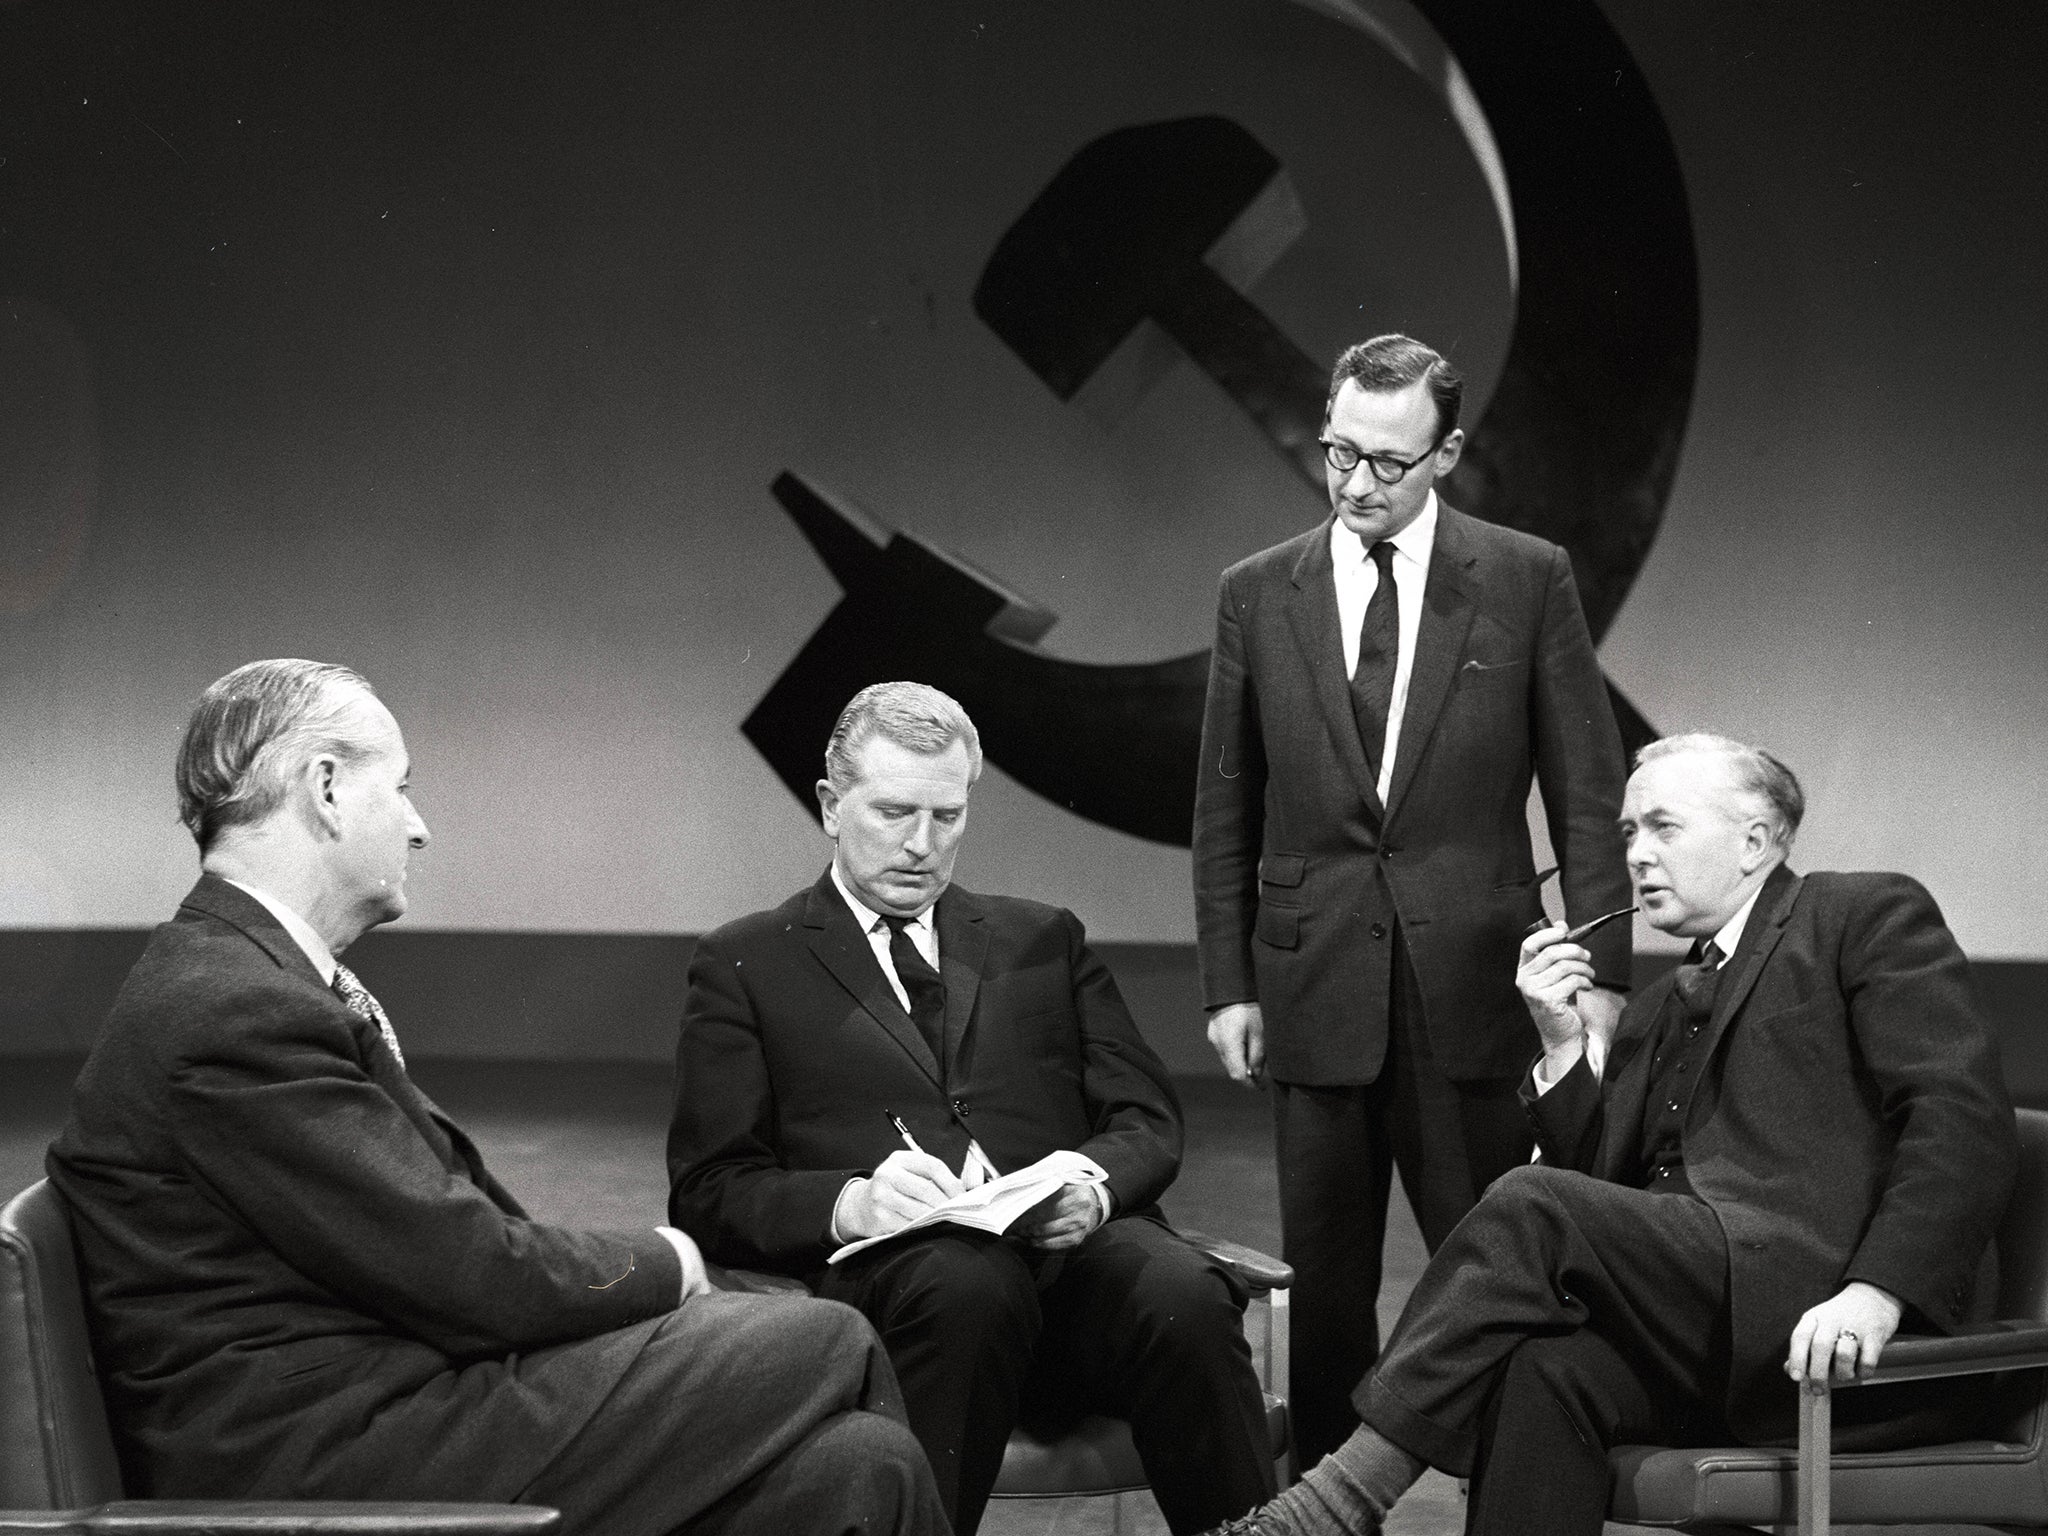 Broadcaster supreme: (from left to right) Lord Gladwyn, John Freeman, David Childs and Harold Wilson on ‘The Great Divide’ TV Programme, 1963